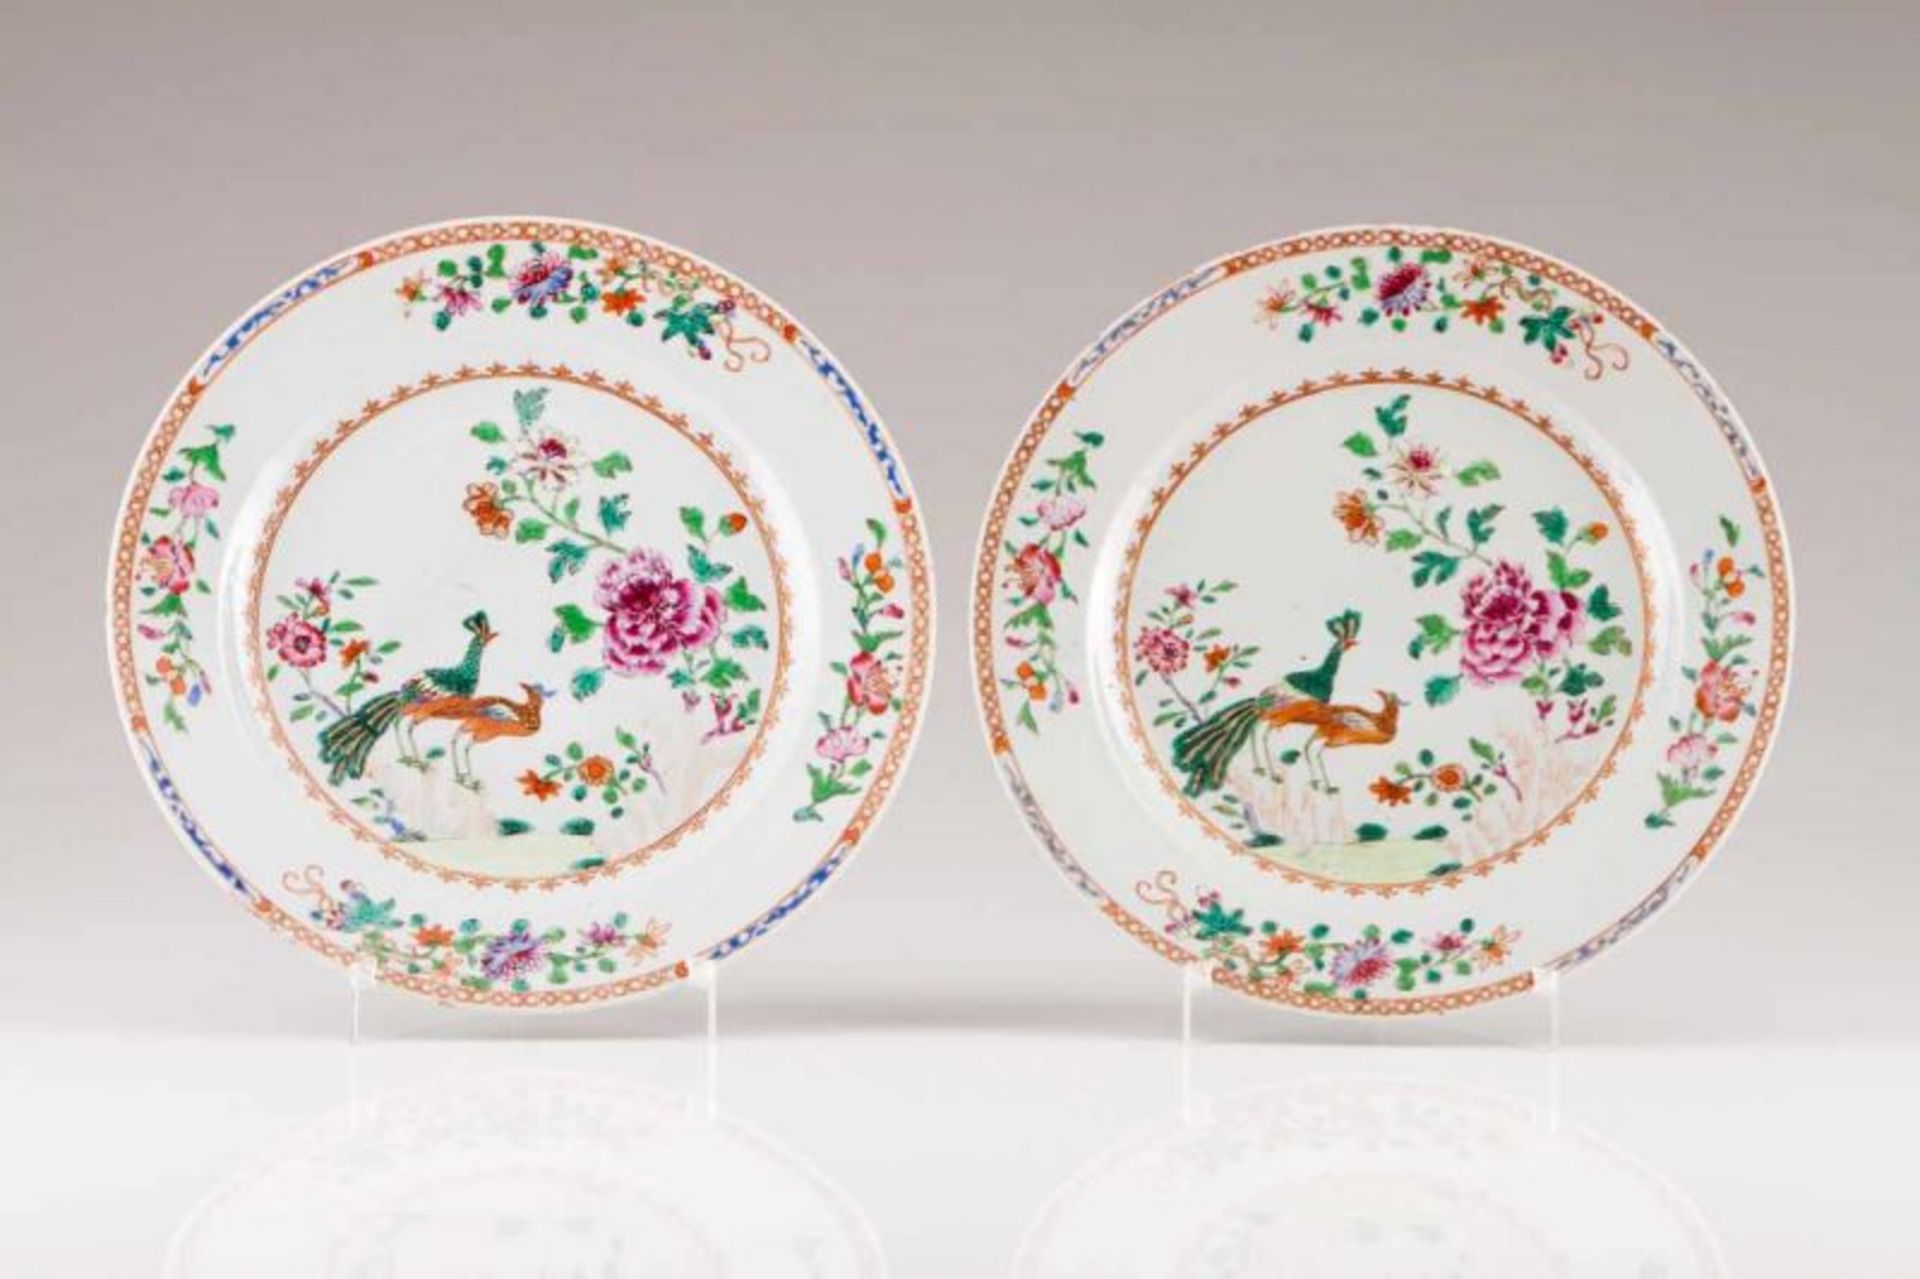 A pair of chargers Chinese export porcelain Polychrome and gilt Famille Rose decoration depicting